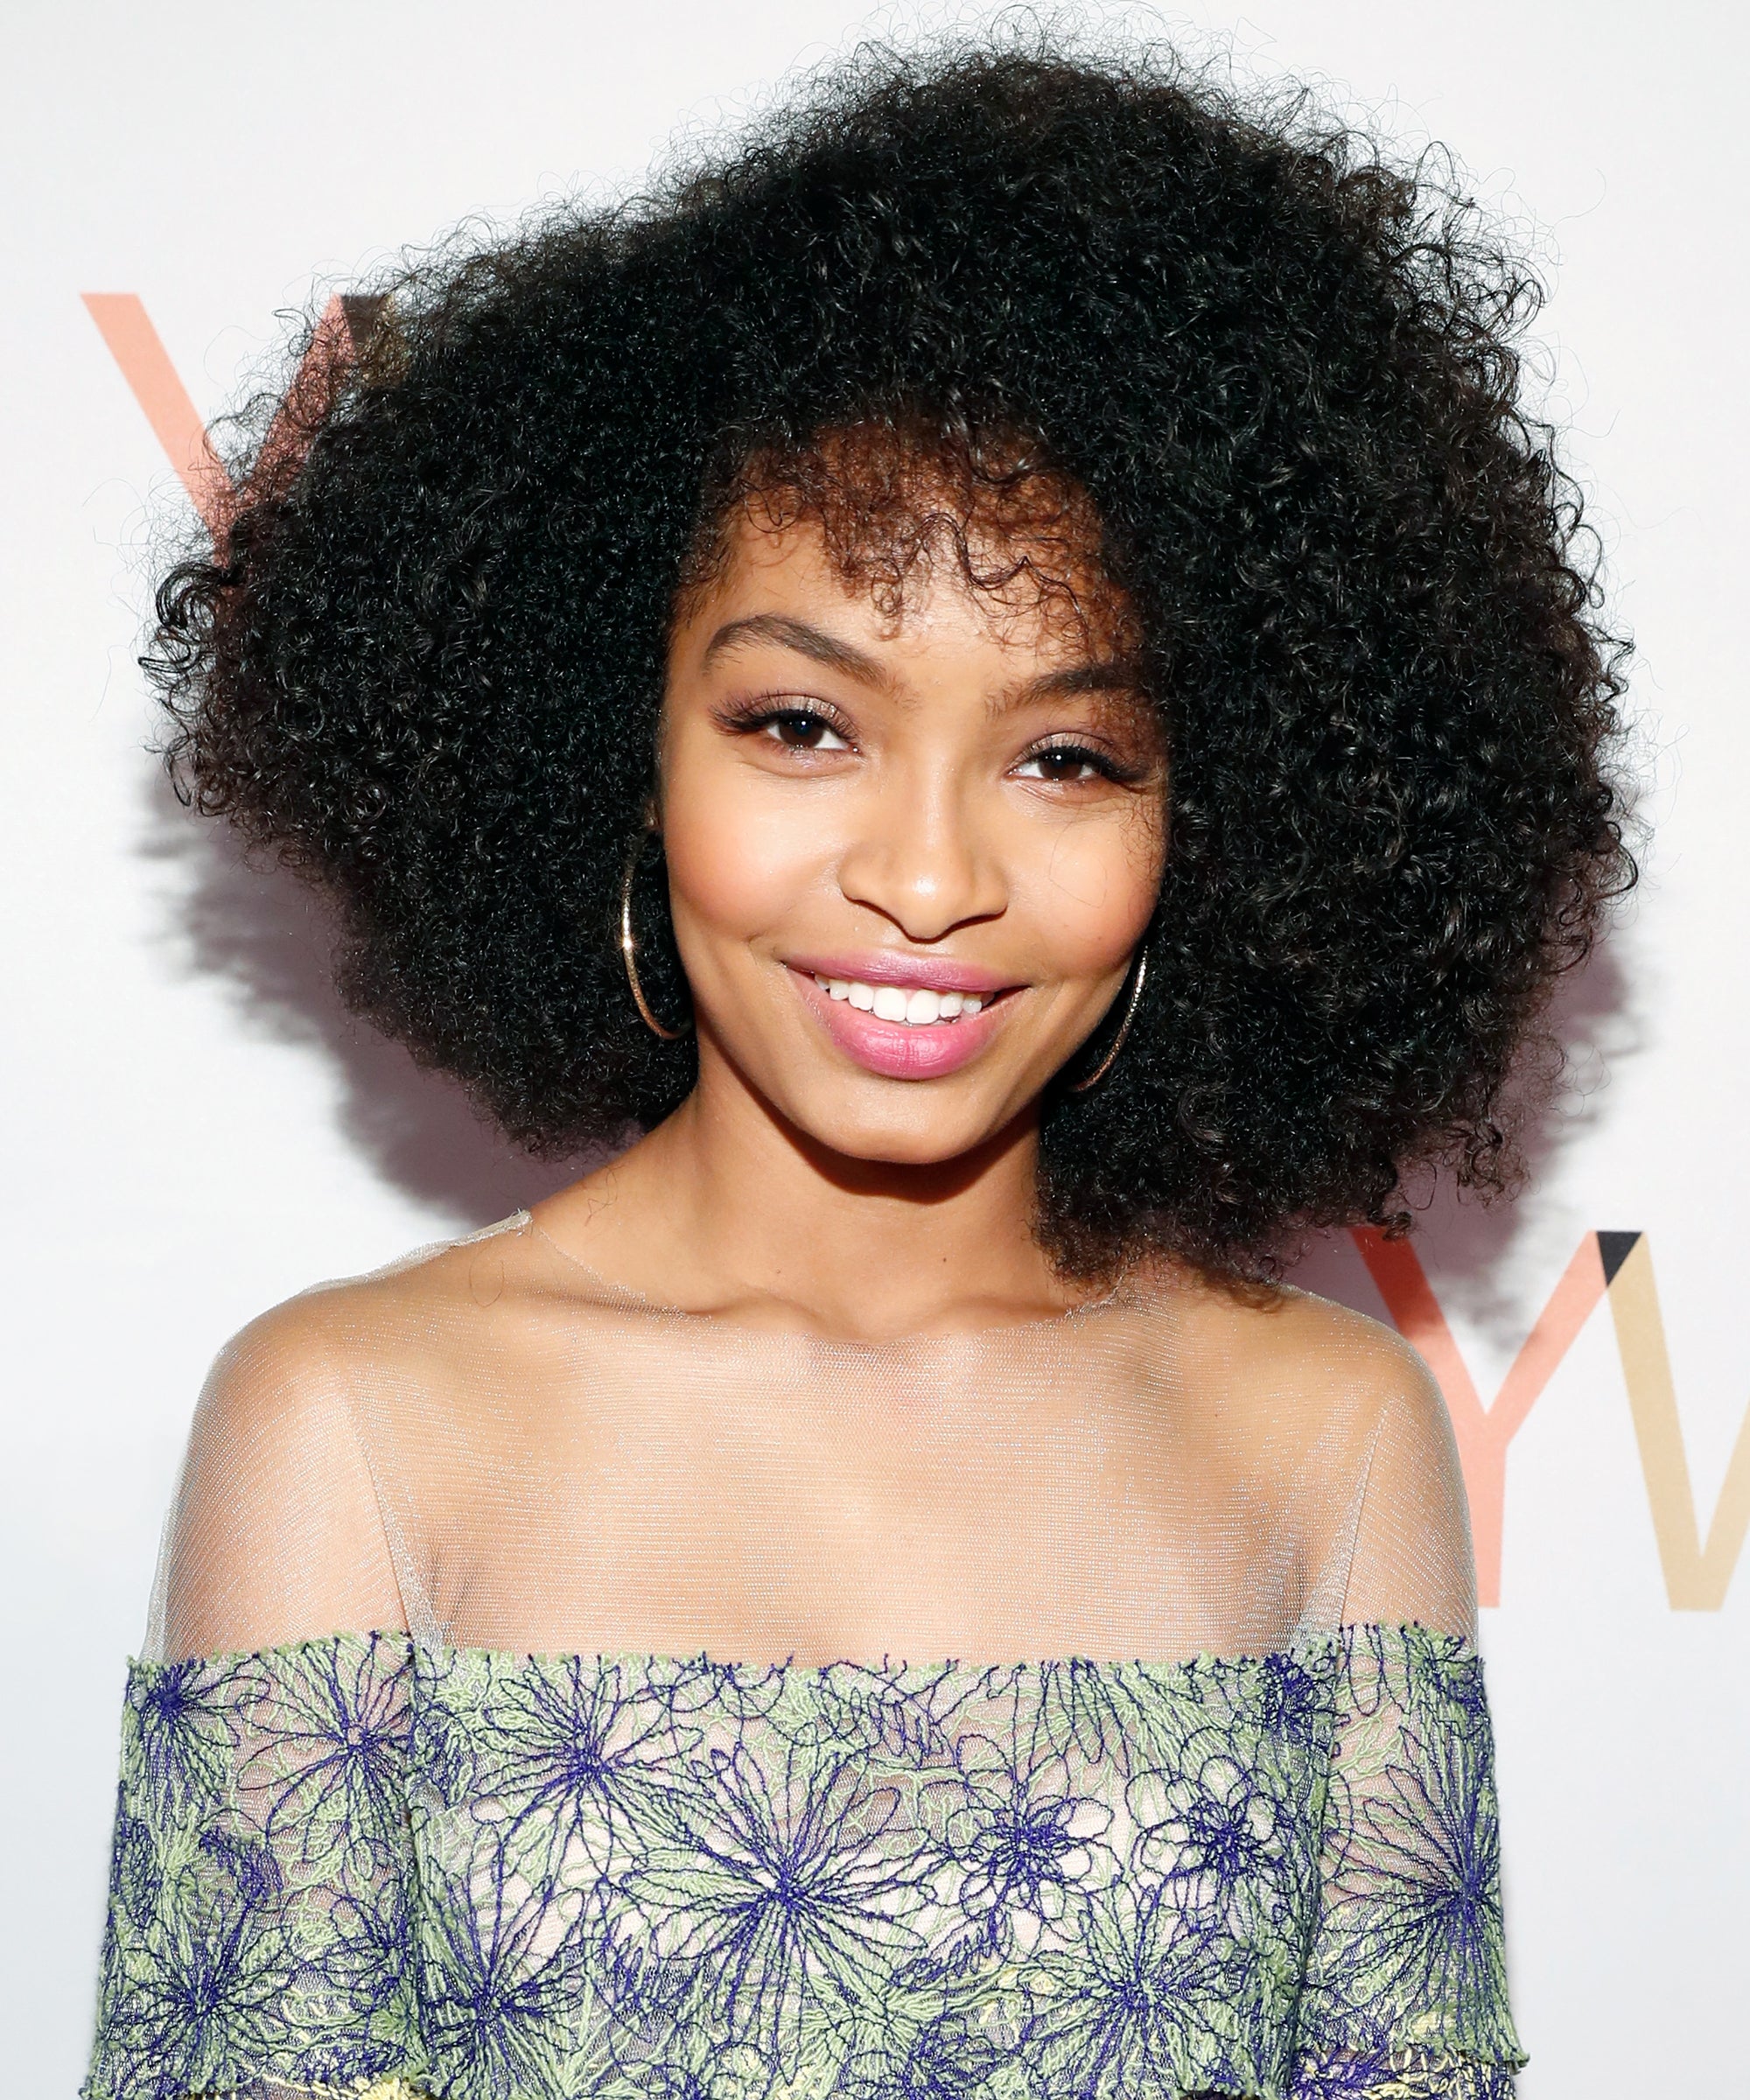 Michelle Obama Must Be Proud! Protege Yara Shahidi Got Into Every Single College She Applied To